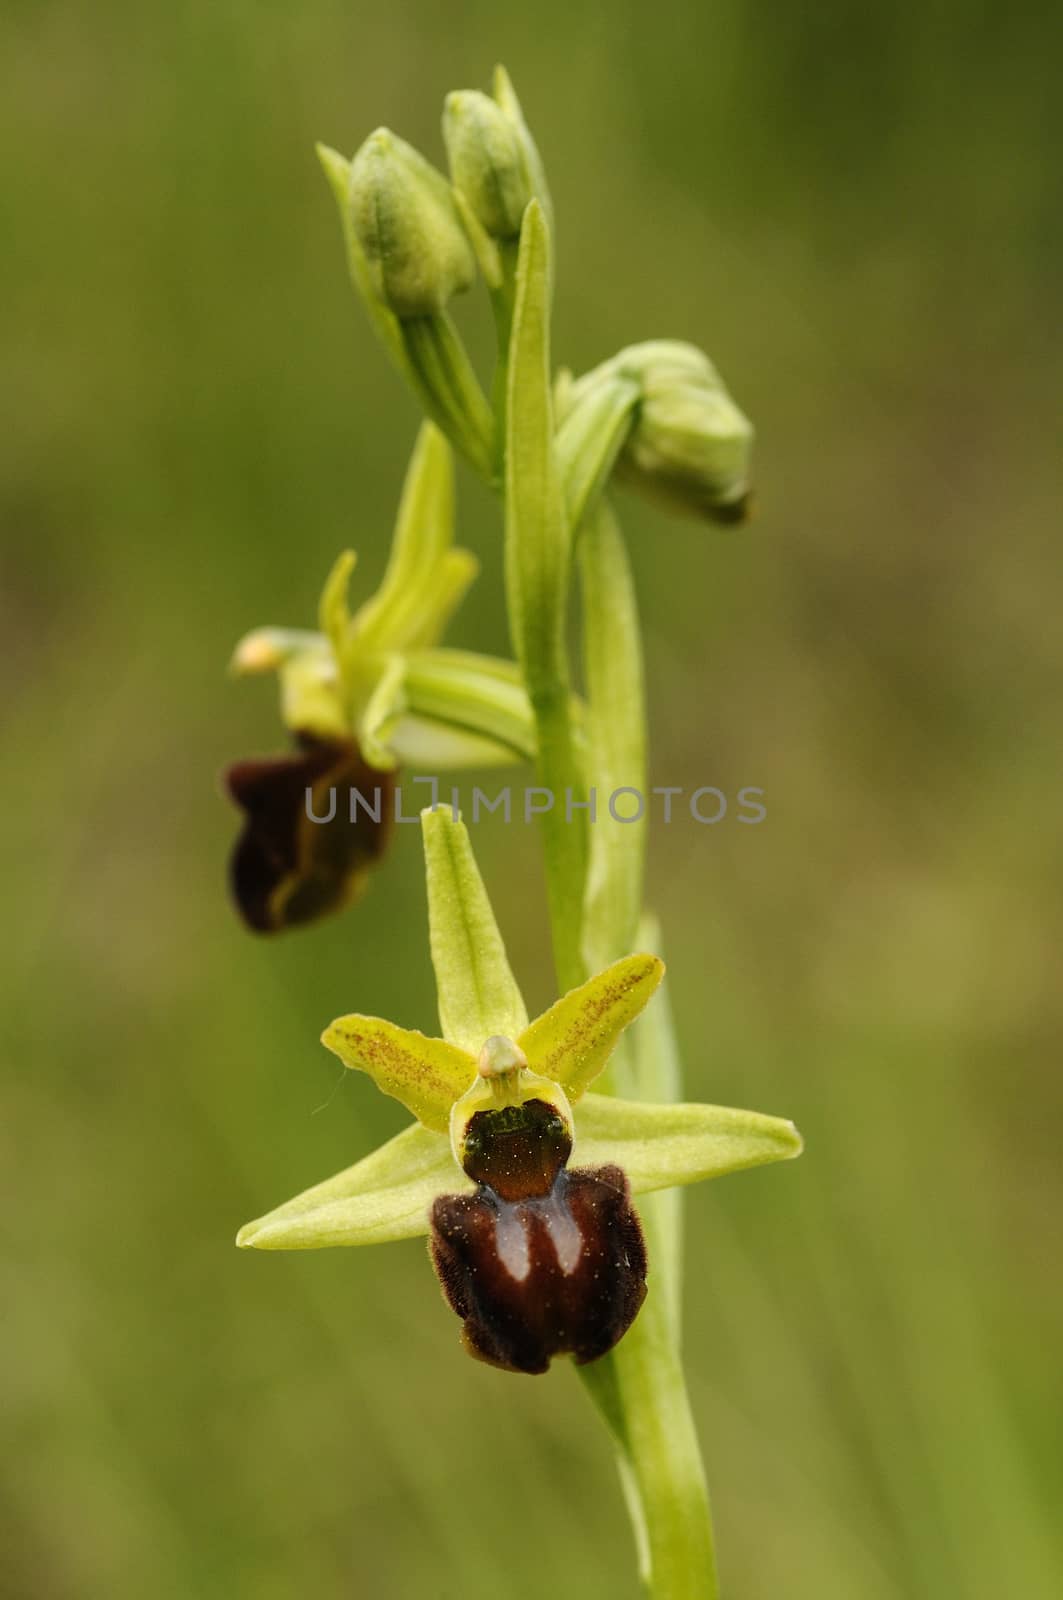 Early Spider Orchid - Ophrys sphegodes, detail of flowers by jalonsohu@gmail.com